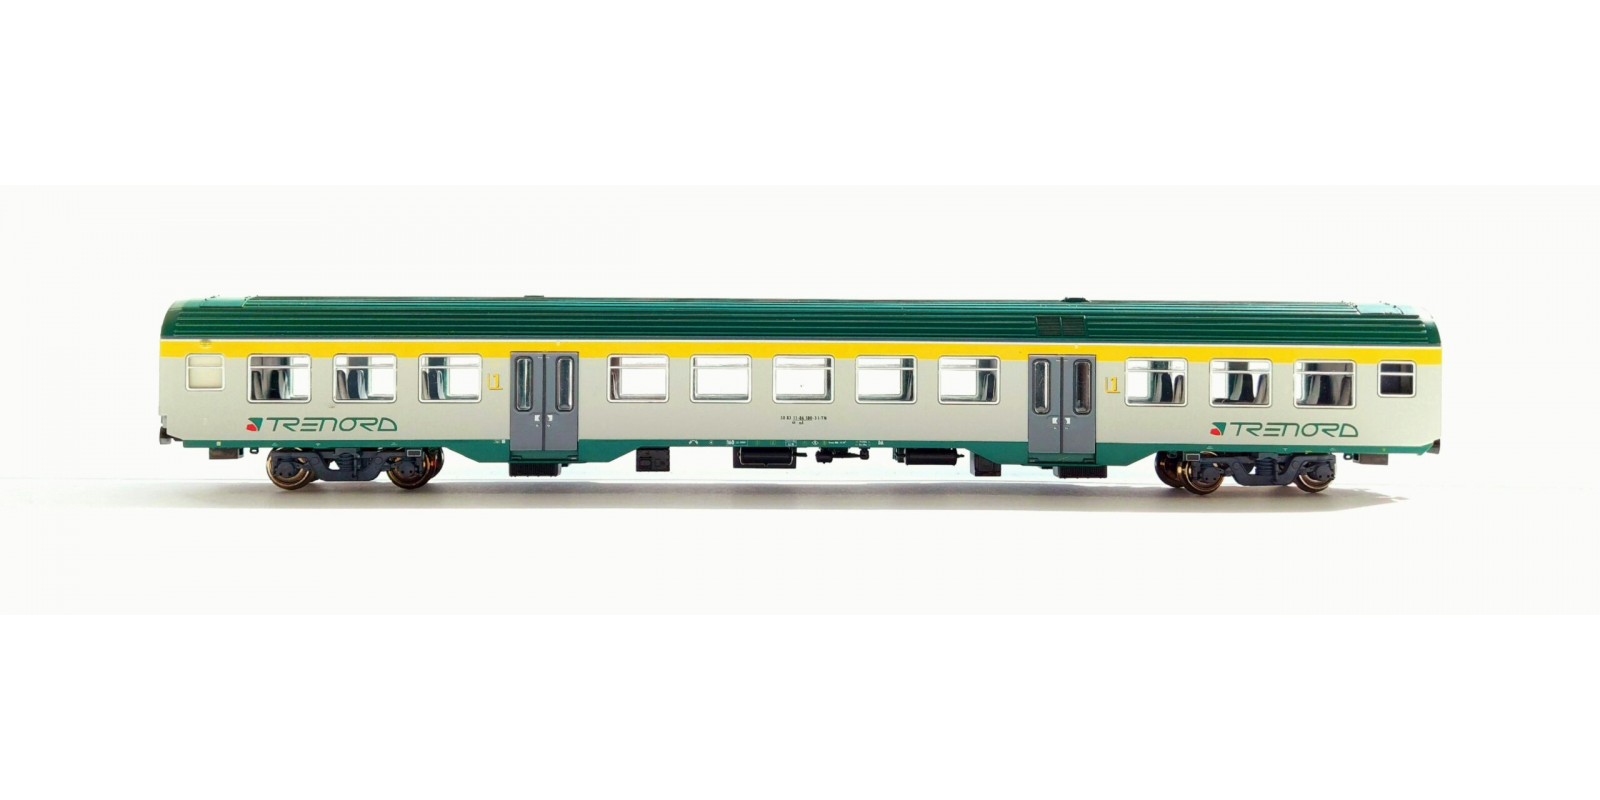 ViT3257 1st class “revamping” MDVC carriage in TRENORD livery